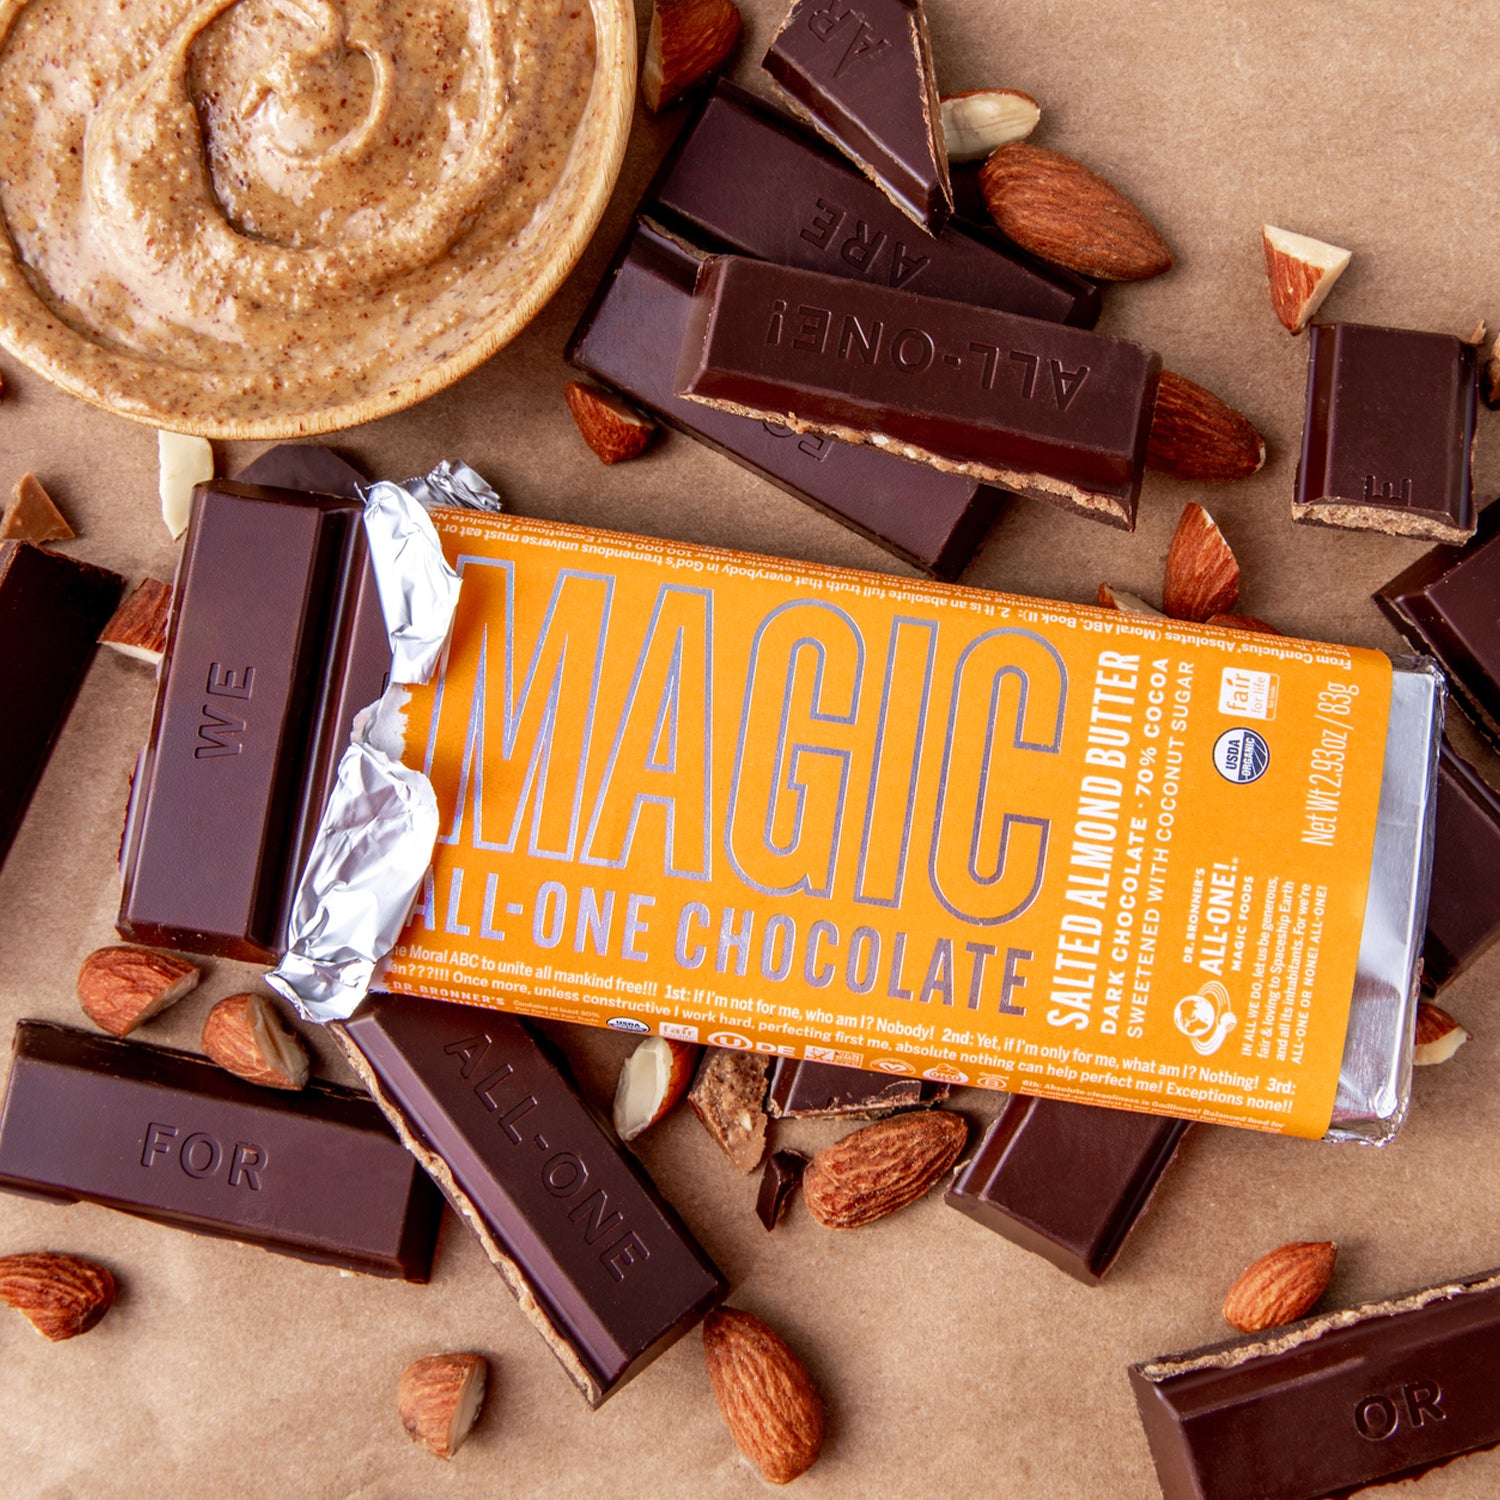 Dr. Bronner's Magic All-One Chocolate - Salted Almond Butter